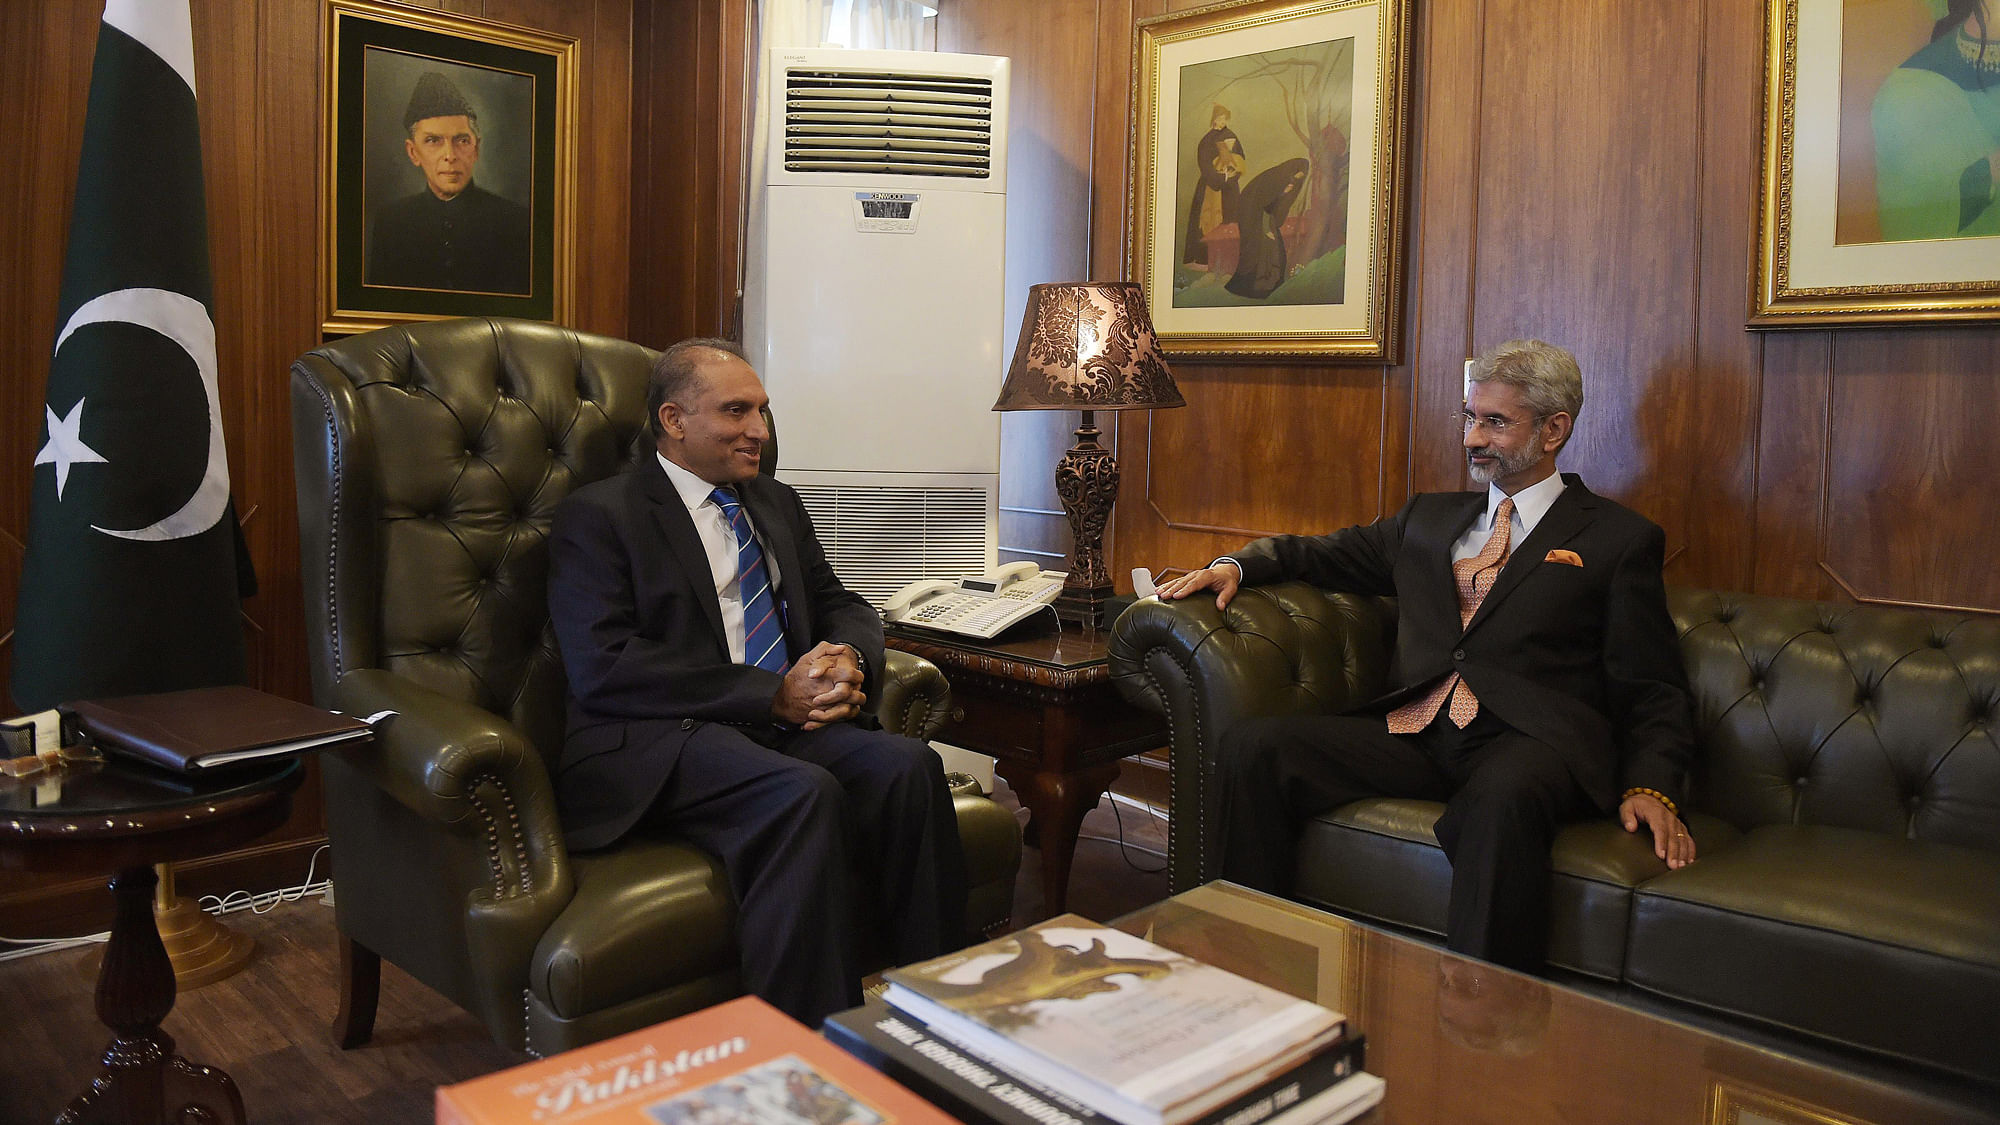 File photo of Indian Foreign Secretary Subrahmanyan Jaishankar, right, meets with his Pakistani counterpart Aizaz Chaudhry during a one-on-one discussion at the Foreign Ministry in Islamabad. (Photo: AP)